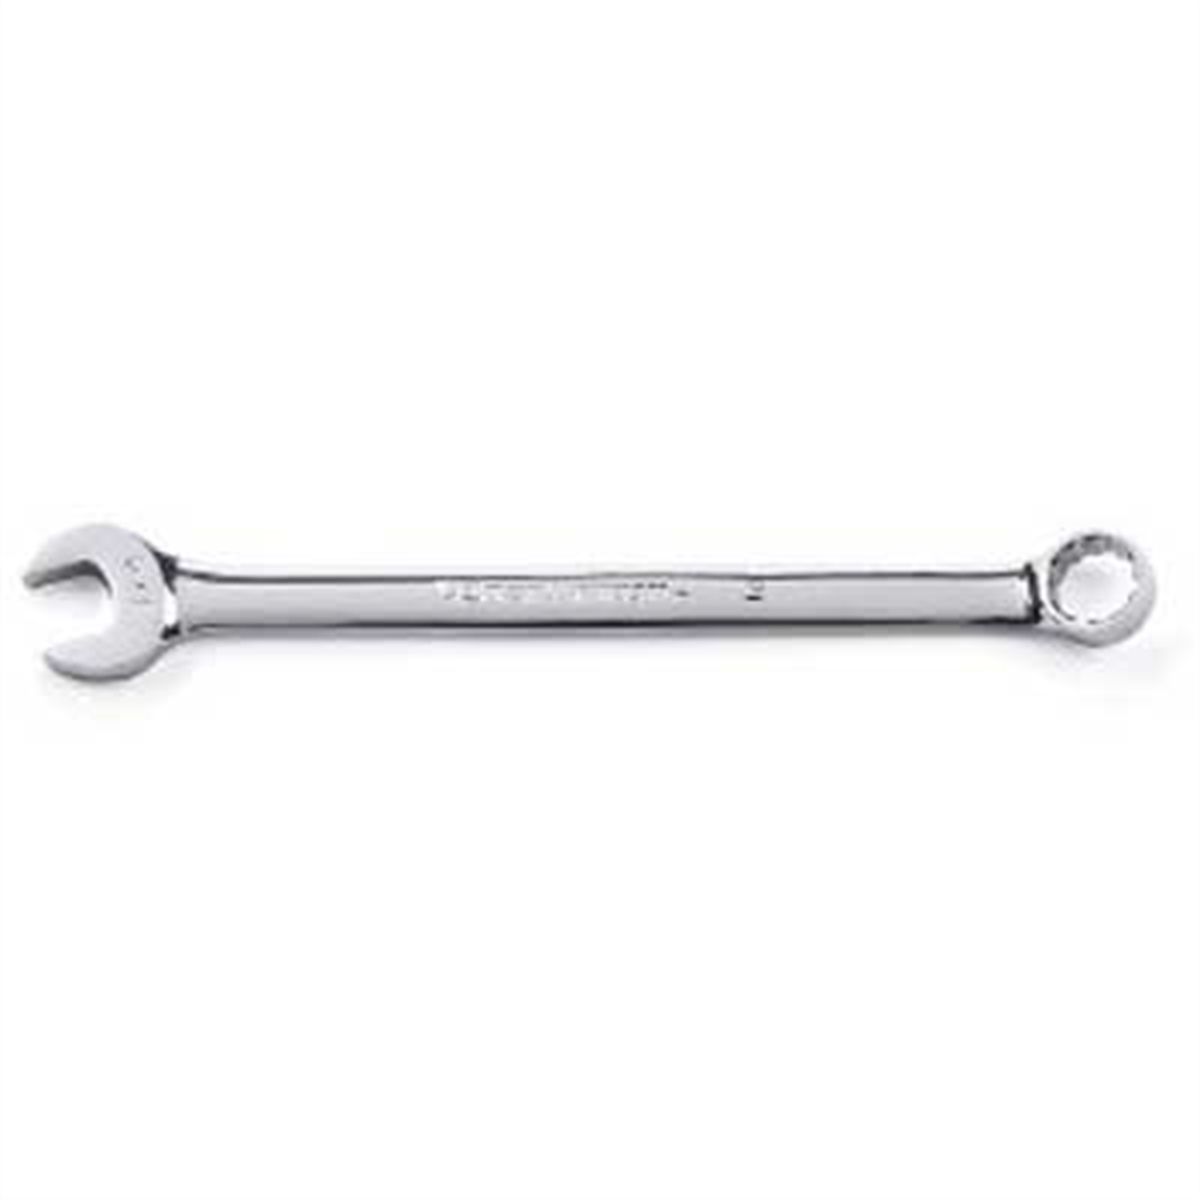 11/32" Long Pattern Combination Wrench